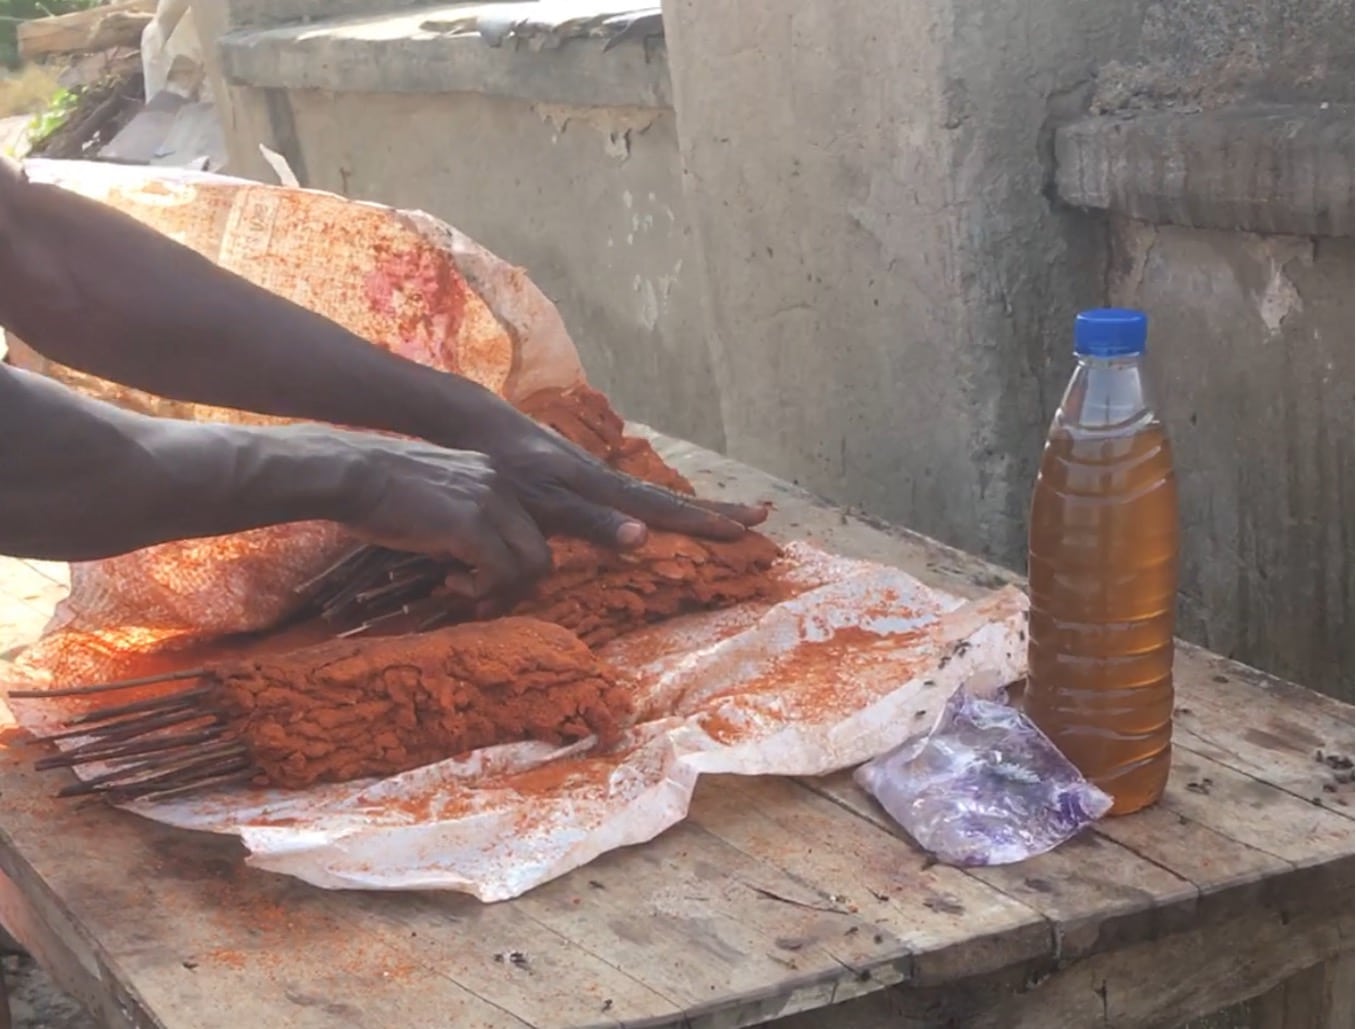 Another Suya seller at Life Camp, Abuja where he is preparing for the day's sale. Beside him is the oil he uses to prepare his suya. Photo credit: Adesola Ikulajolu